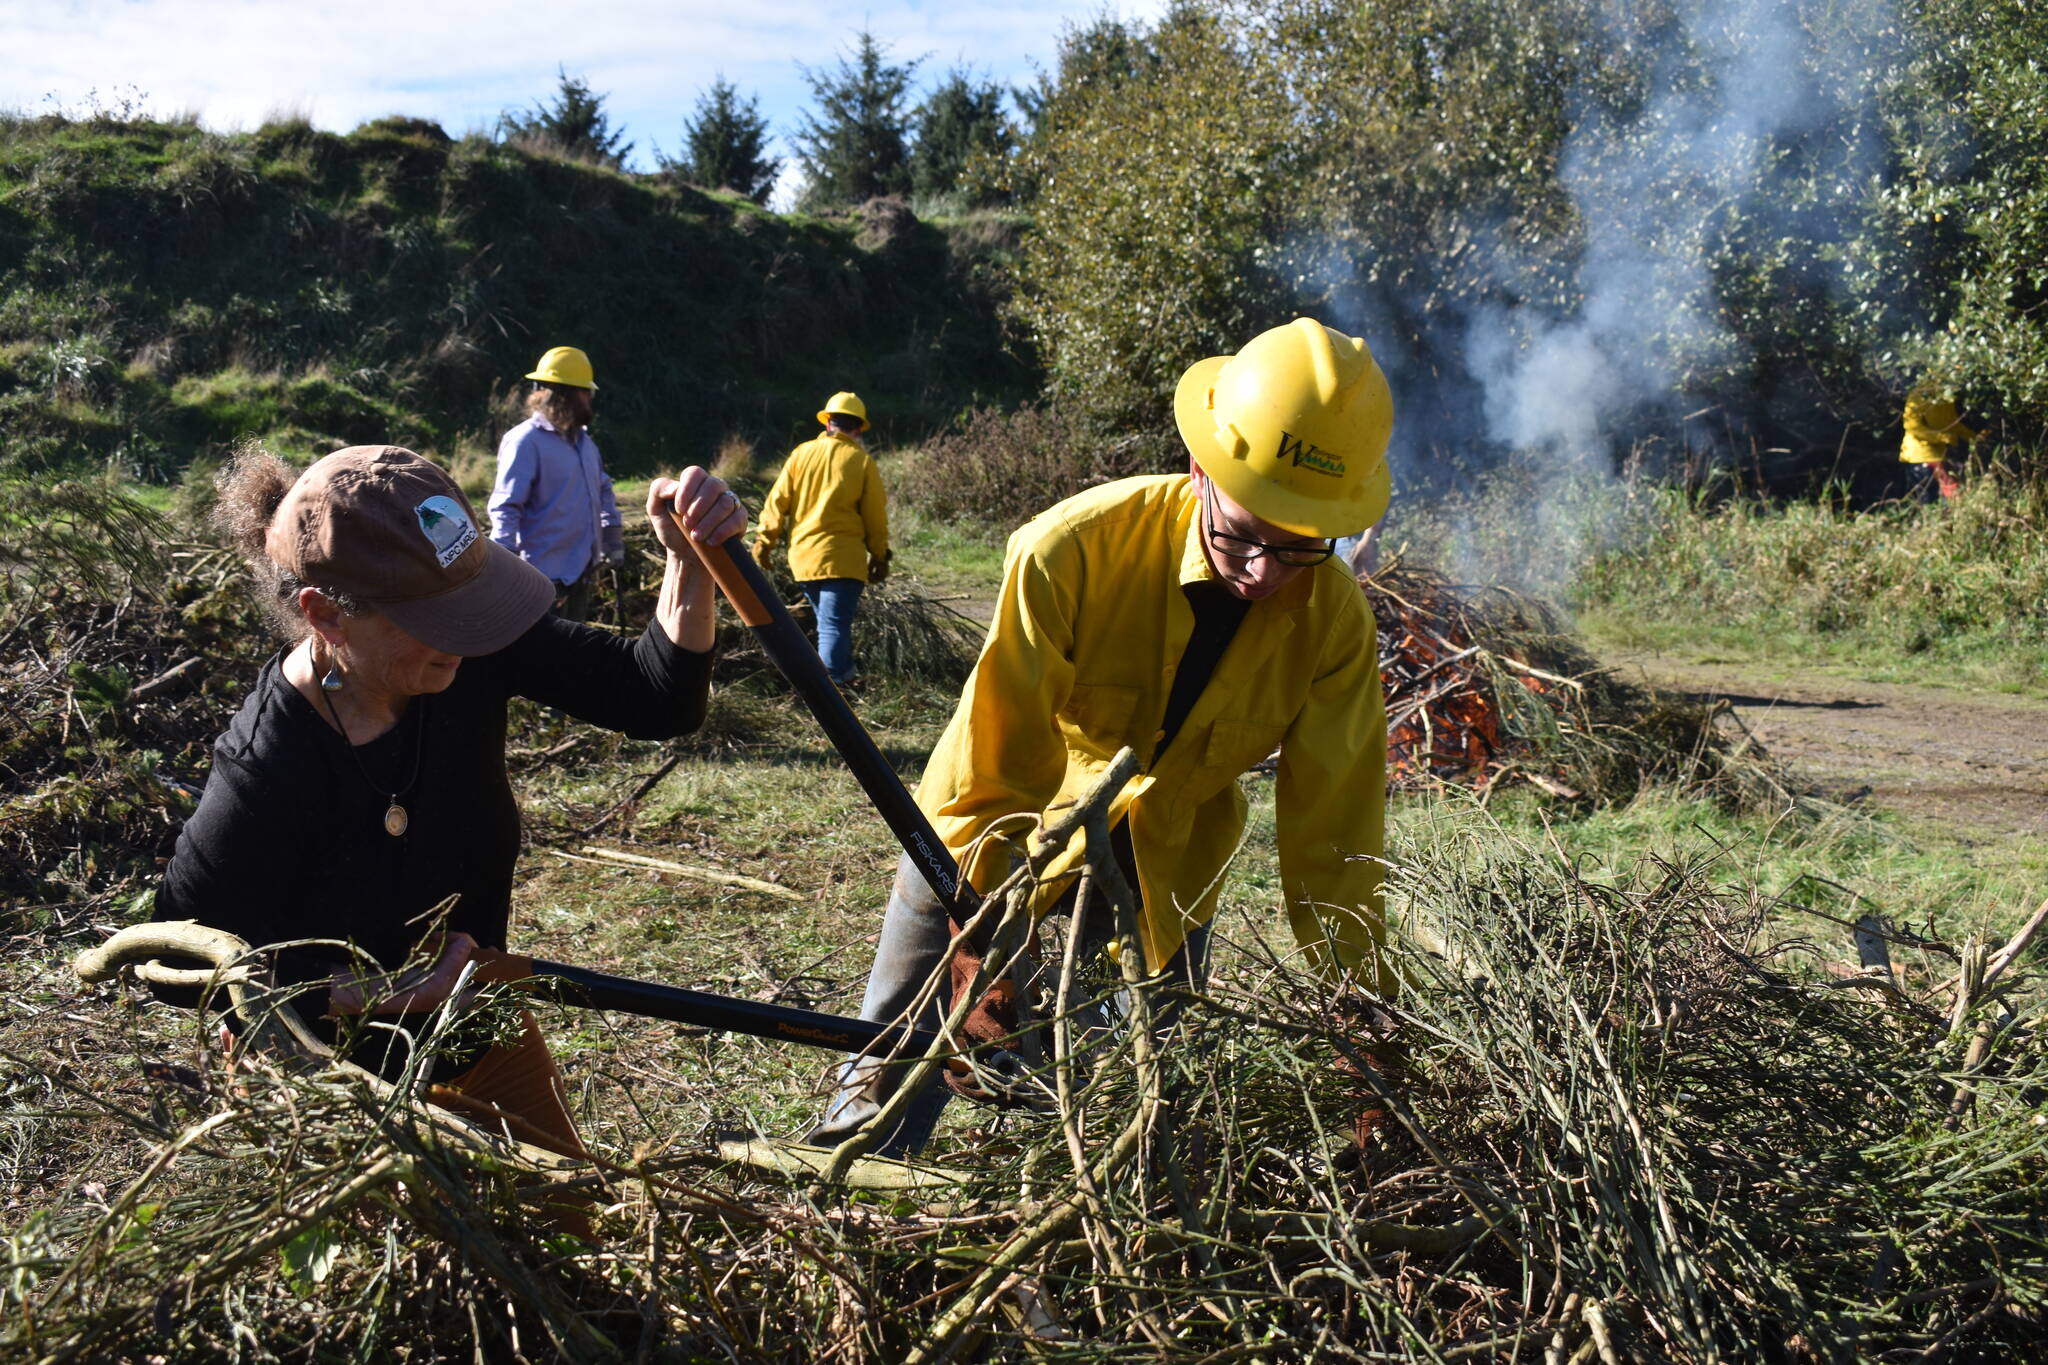 Clayton Franke / The Daily World
Jill Silver, executive director of the environmental nonprofit 10,000 Years Institute, cuts Scotch broom for burning on Wednesday, Oct. 18.